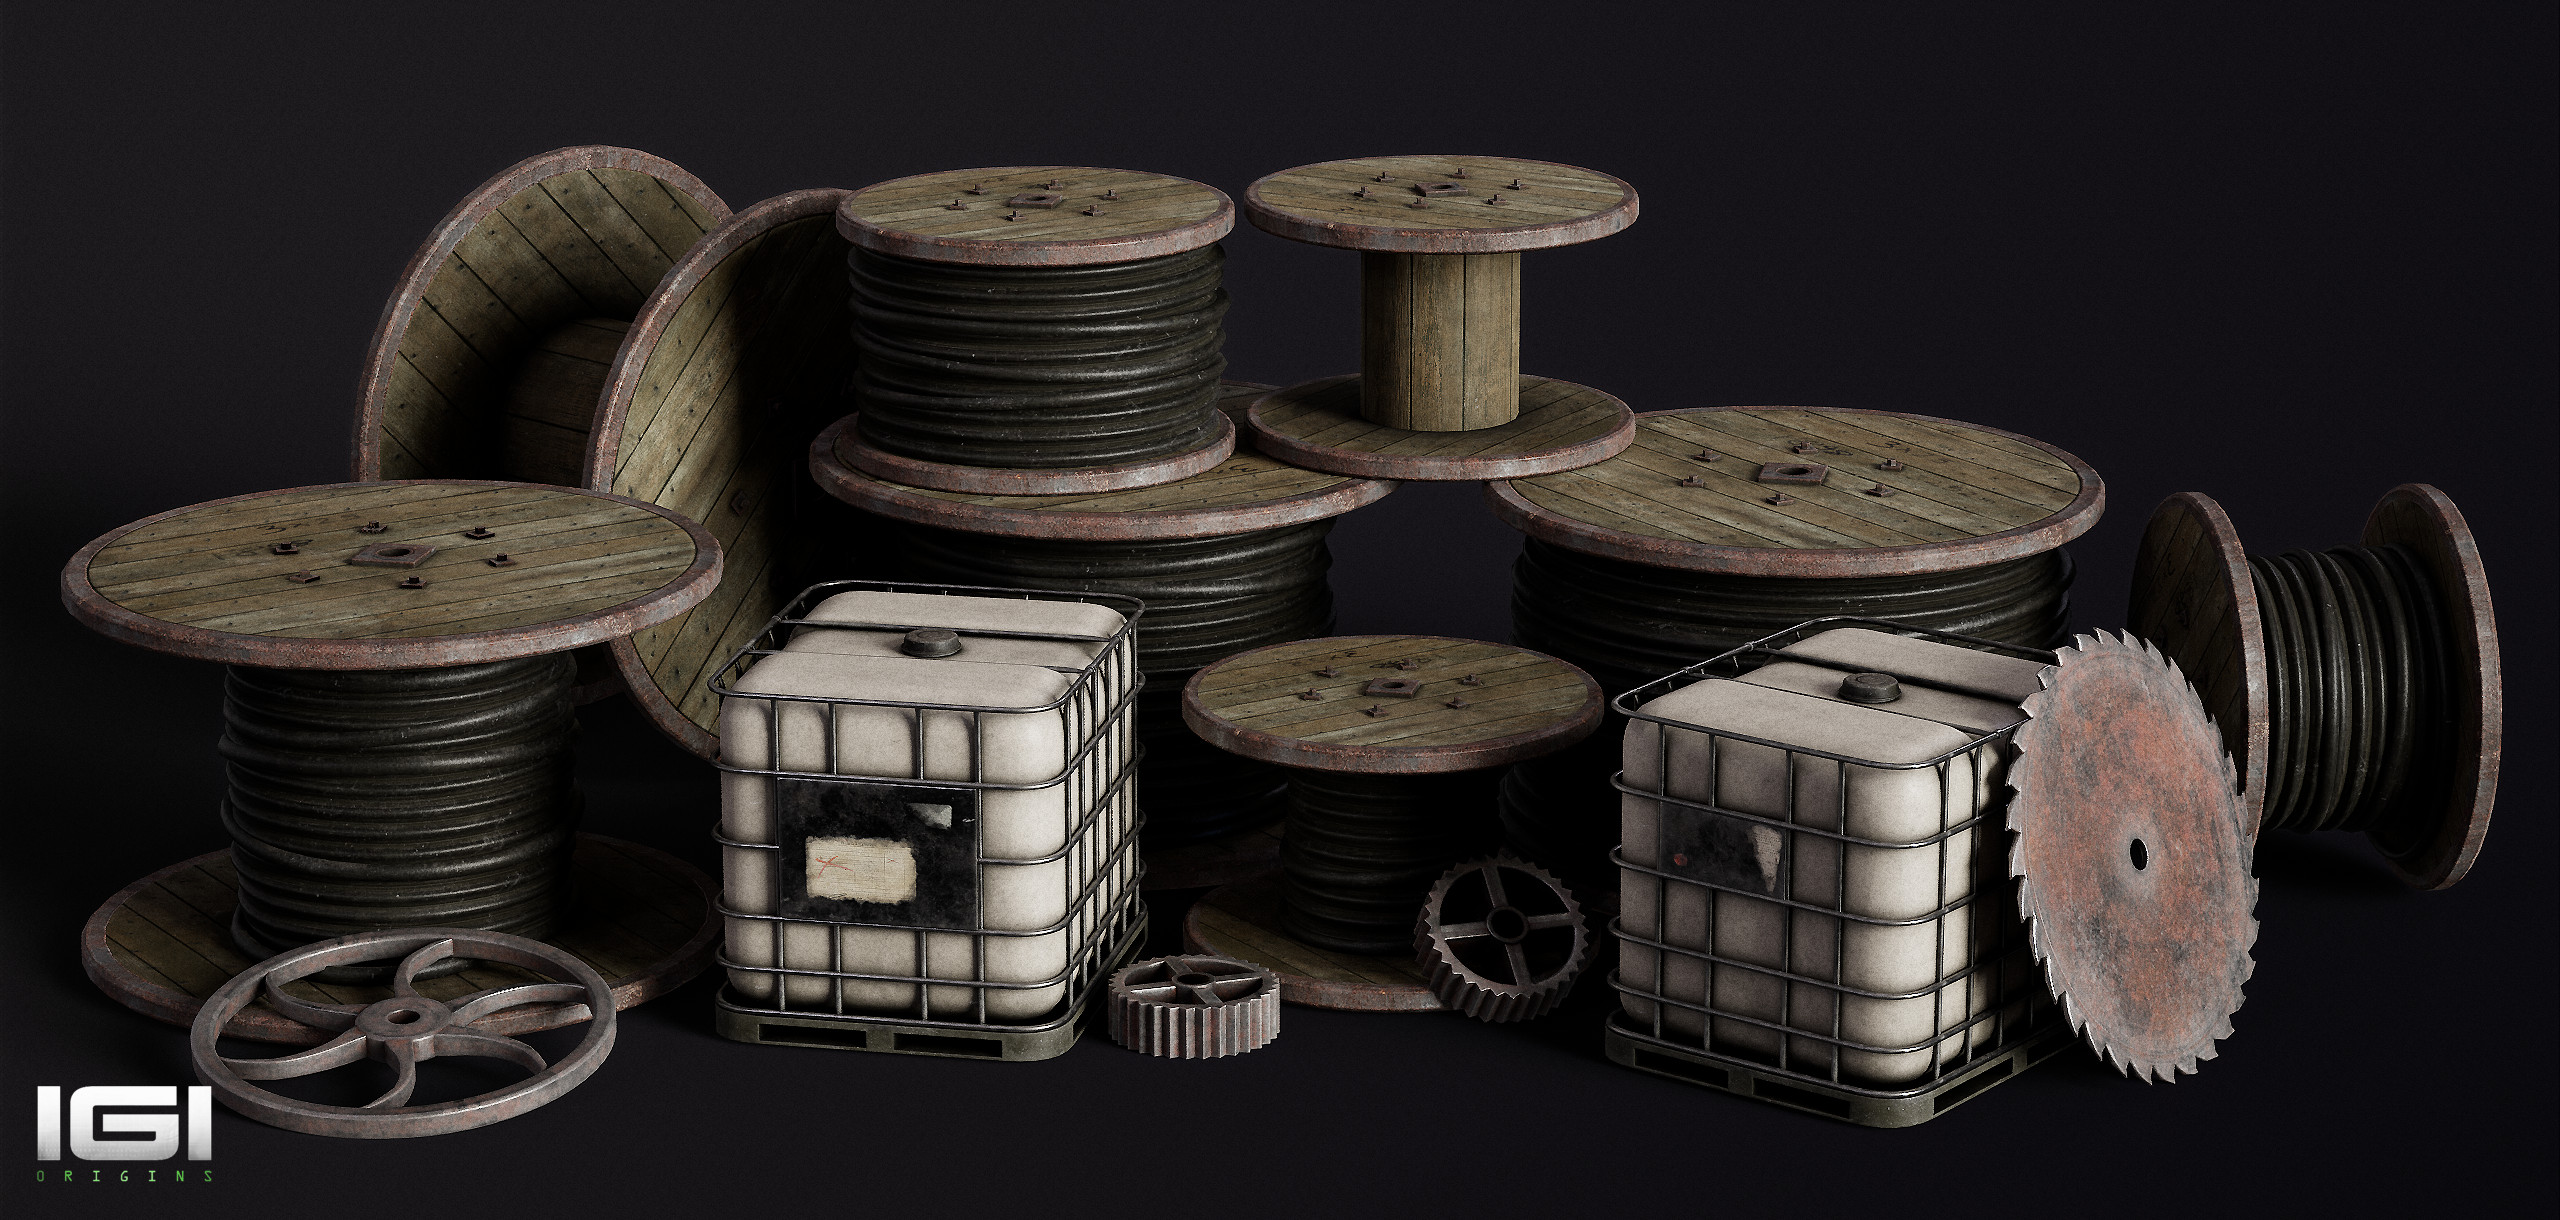 Some of the props I created for this level. They use a mix of bespoke texturing and trim/atlas workflows.